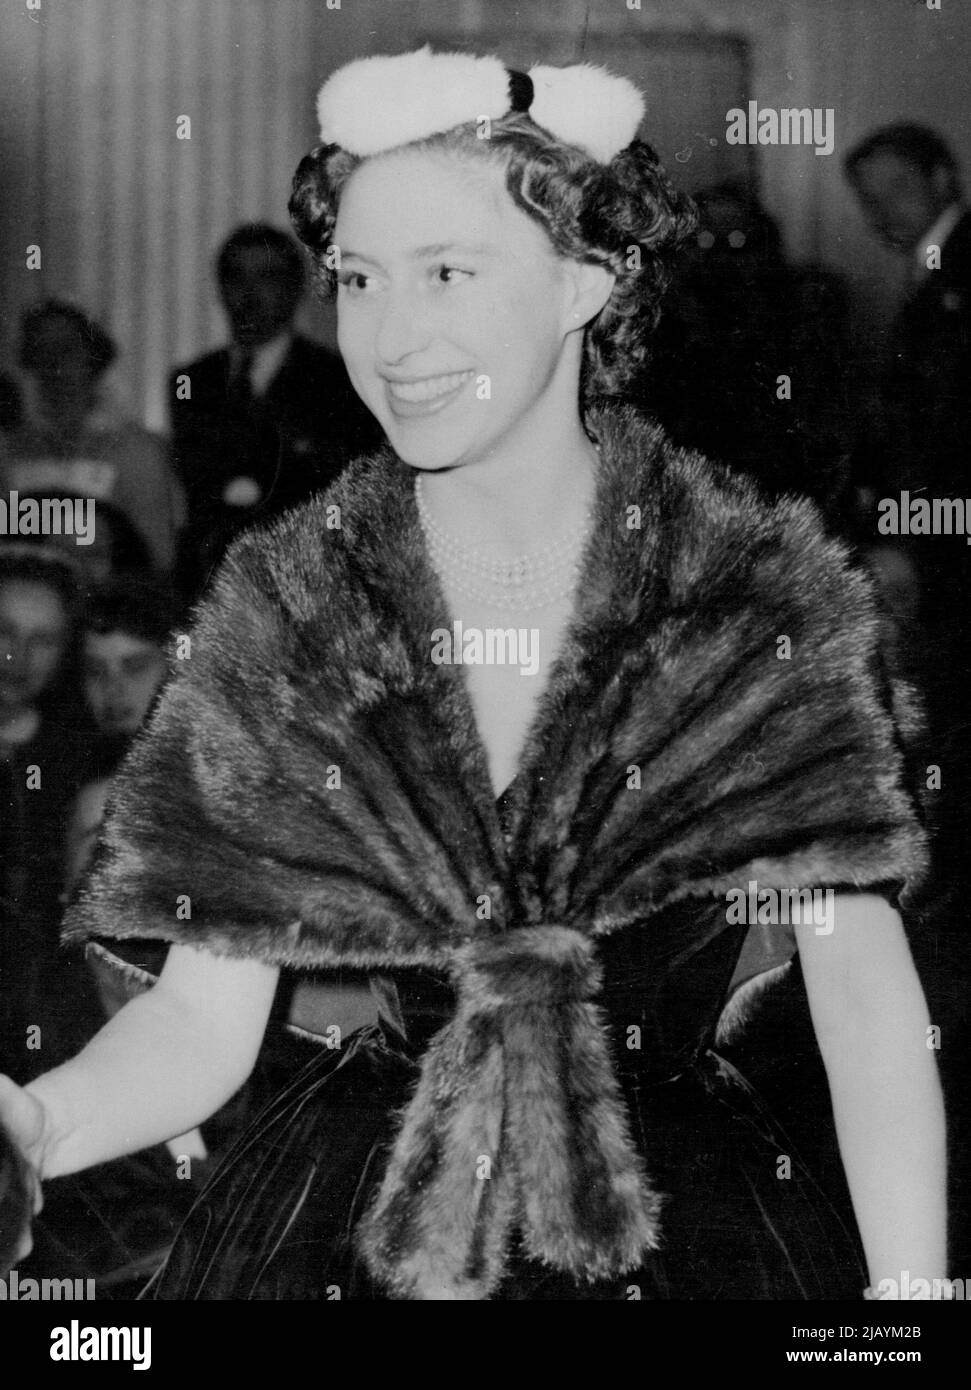 Princess Margaret At Dior Fashion Show in Palace - Princess Margaret is Obviously Enjoying herself at the presentation of Christian Dior's Paris Winter Collection held in Blenheim Palace, ***** Oxfordshire, this evening November 3. Her tiny velvet pill box hat is encircled with white ermine and her mink cape stole is worn over a black velvet dress with a bouffant skirt. About 1,600 guests paid five guineas each to attend the show, staged by 13 mannequins flown from Paris for the occasion. The palace was lent by the Duke and Duchess of Marlborough. November 03, 1954. (Photo by Associated Press Stock Photo